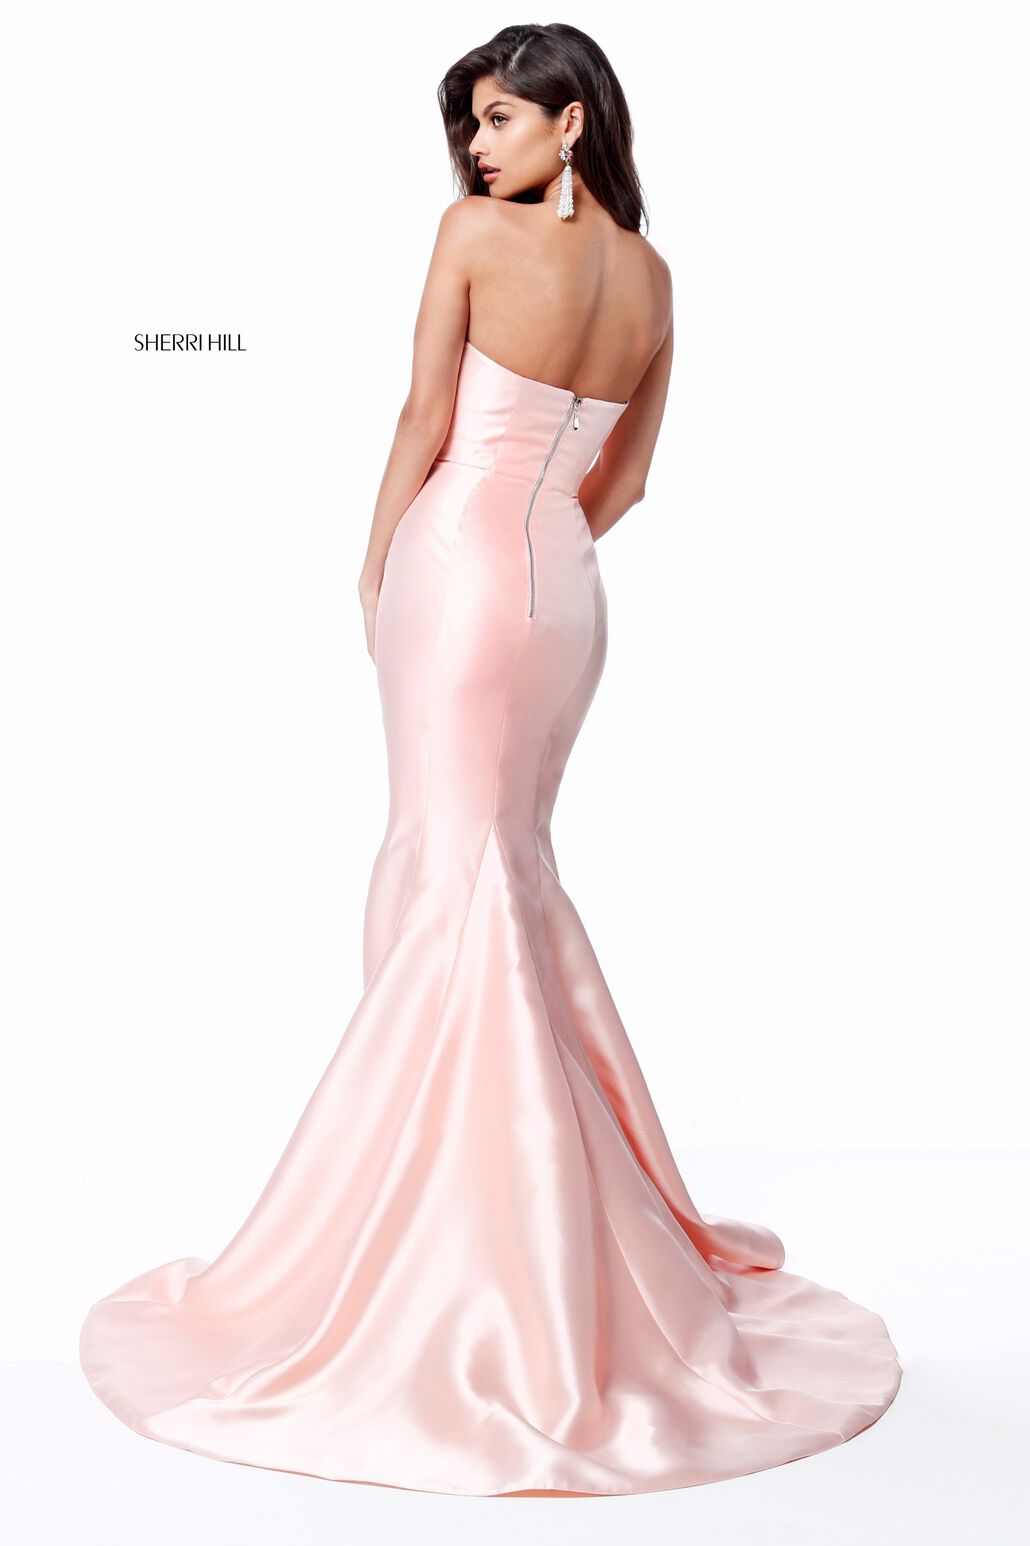 Sherri Hill 51671 - An elegant strapless mikado mermaid gown with a high slit, perfect for a sophisticated and timeless look.  The model is wearing the color blush.  Back view.